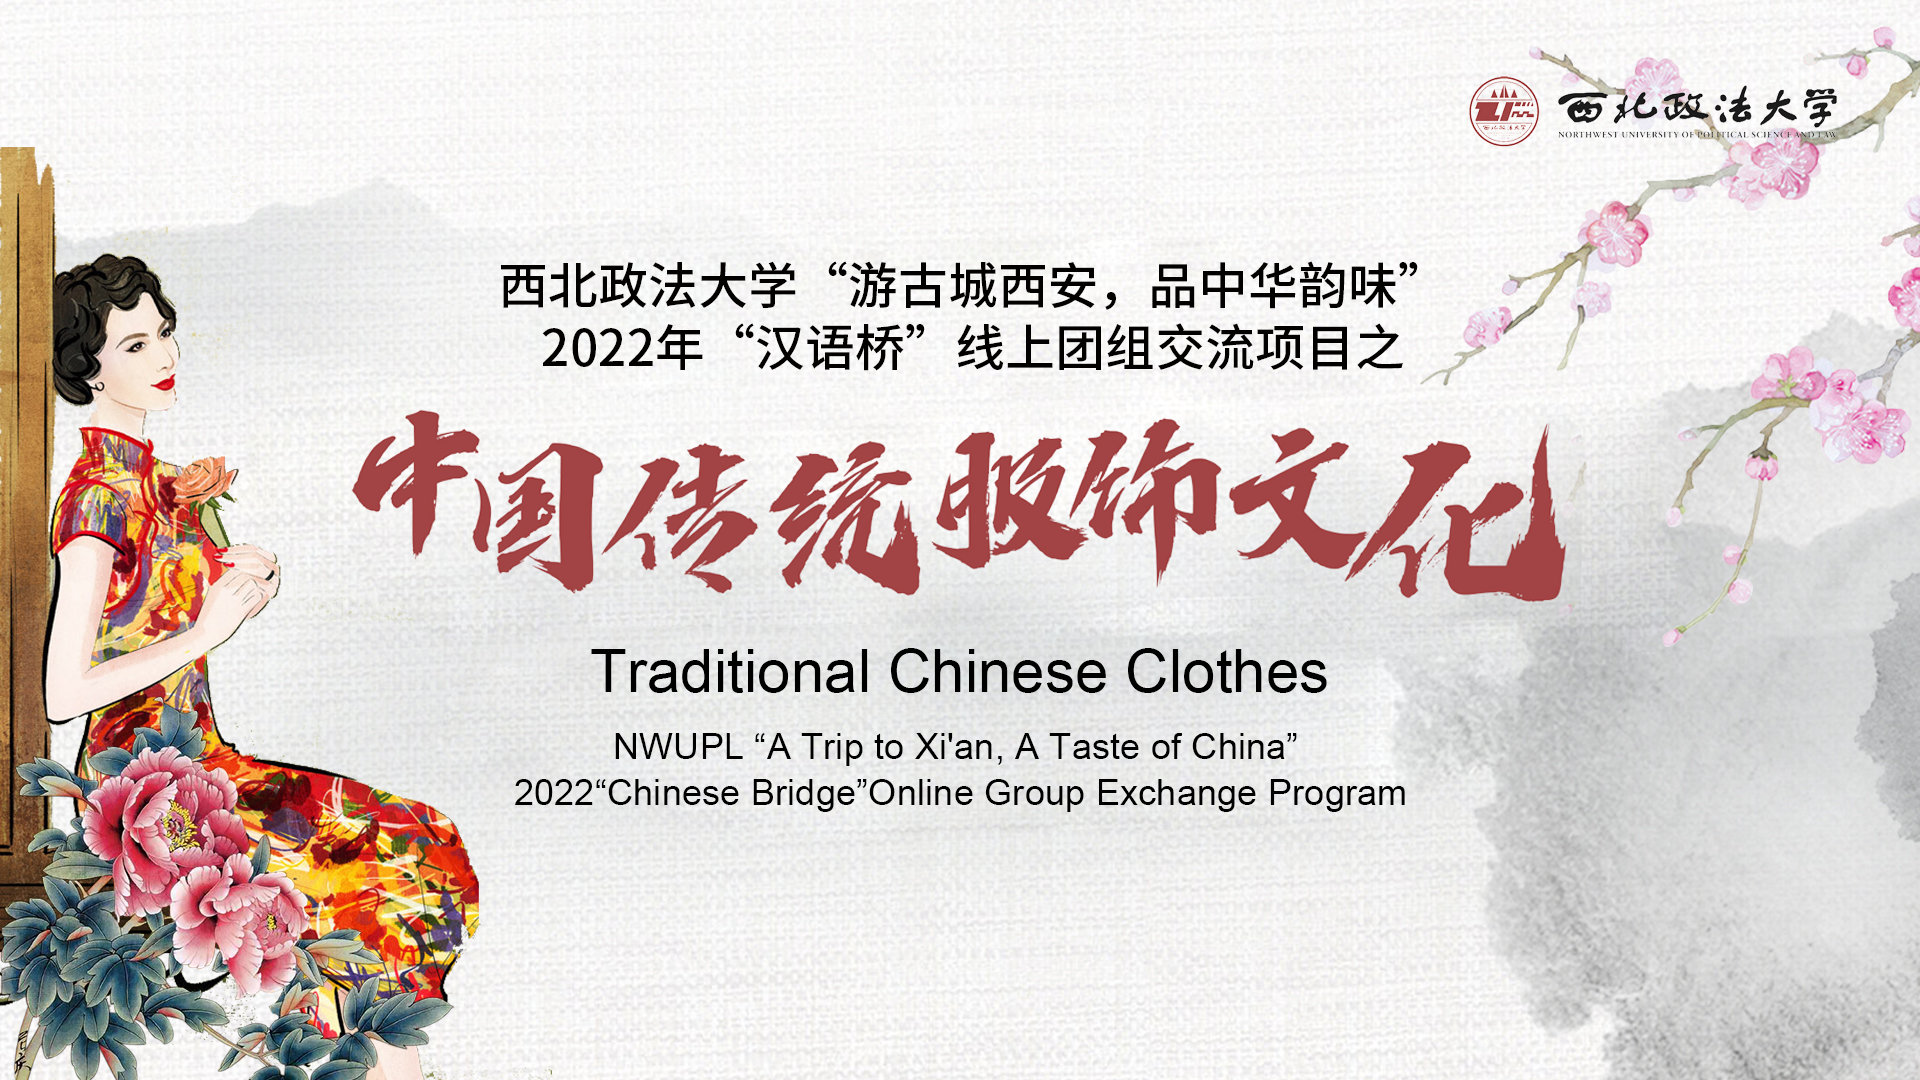 Traditional Chinese Clothes